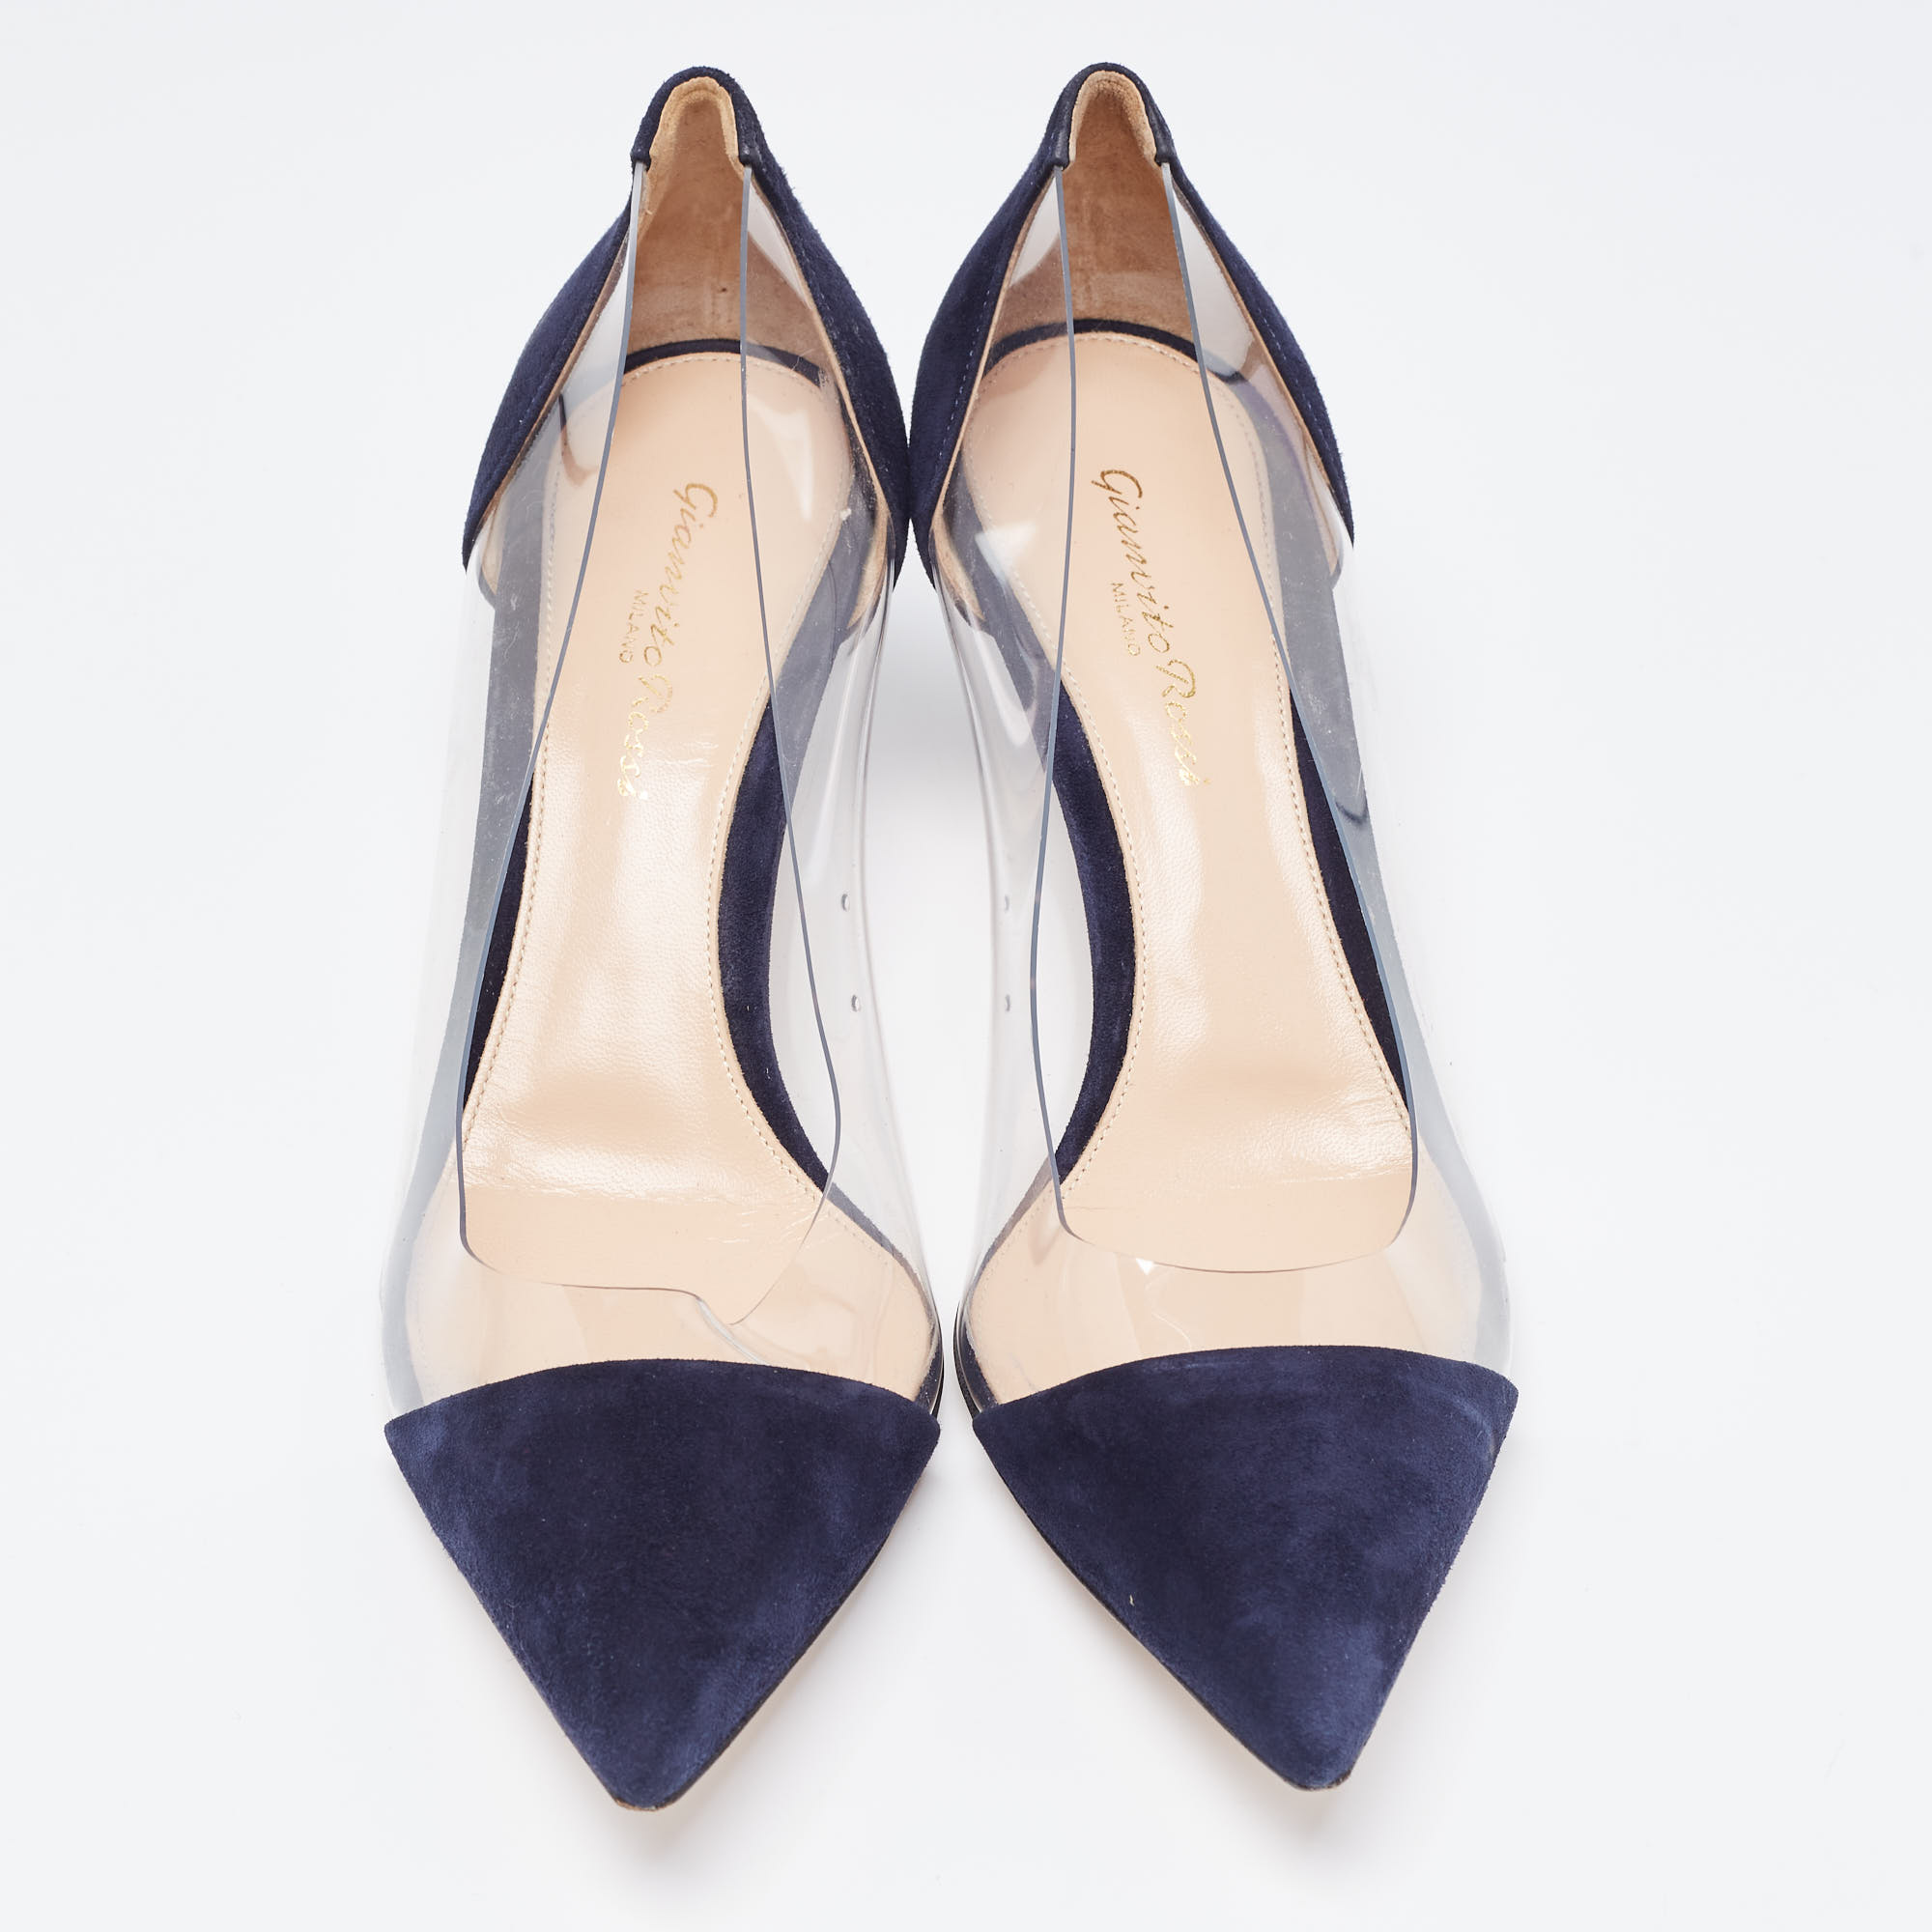 Gianvito Rossi Navy Blue Suede And PVC Plexi  Pumps Size 38.5